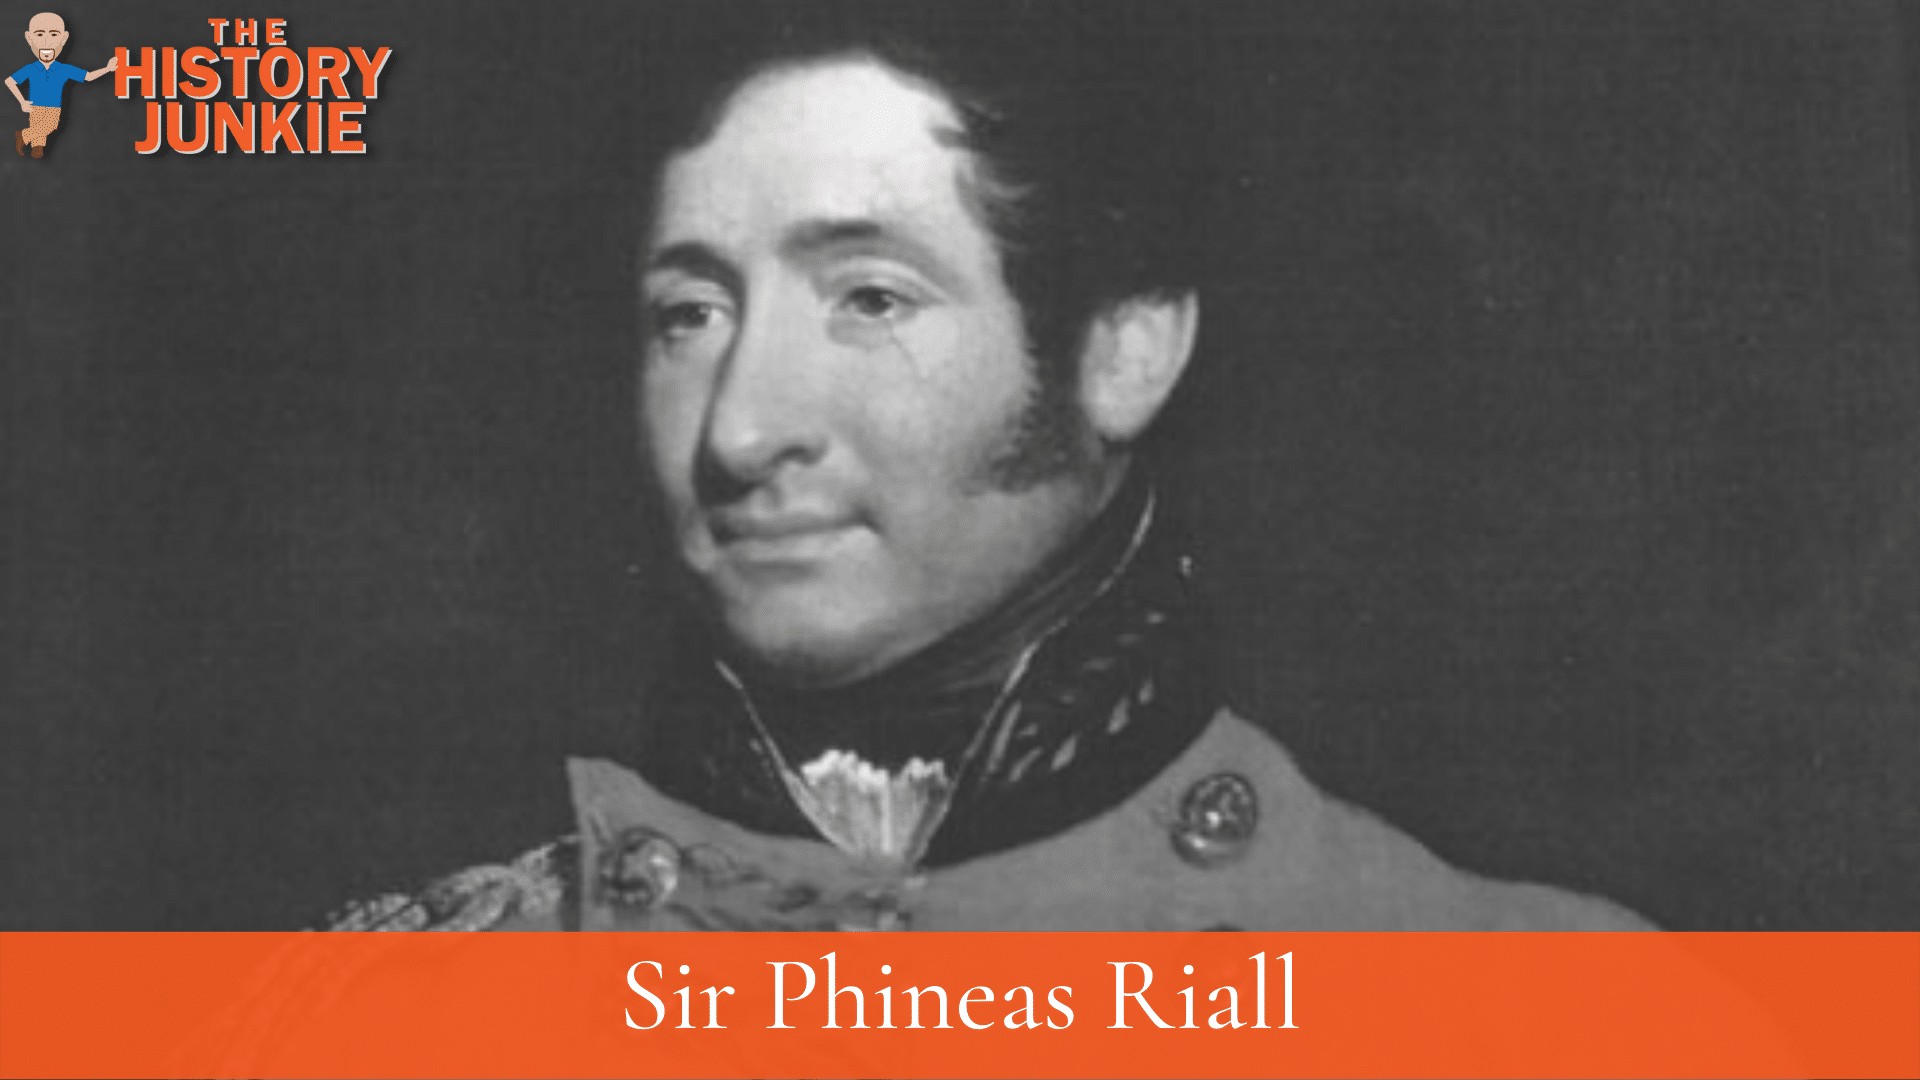 Sir Phineas Riall